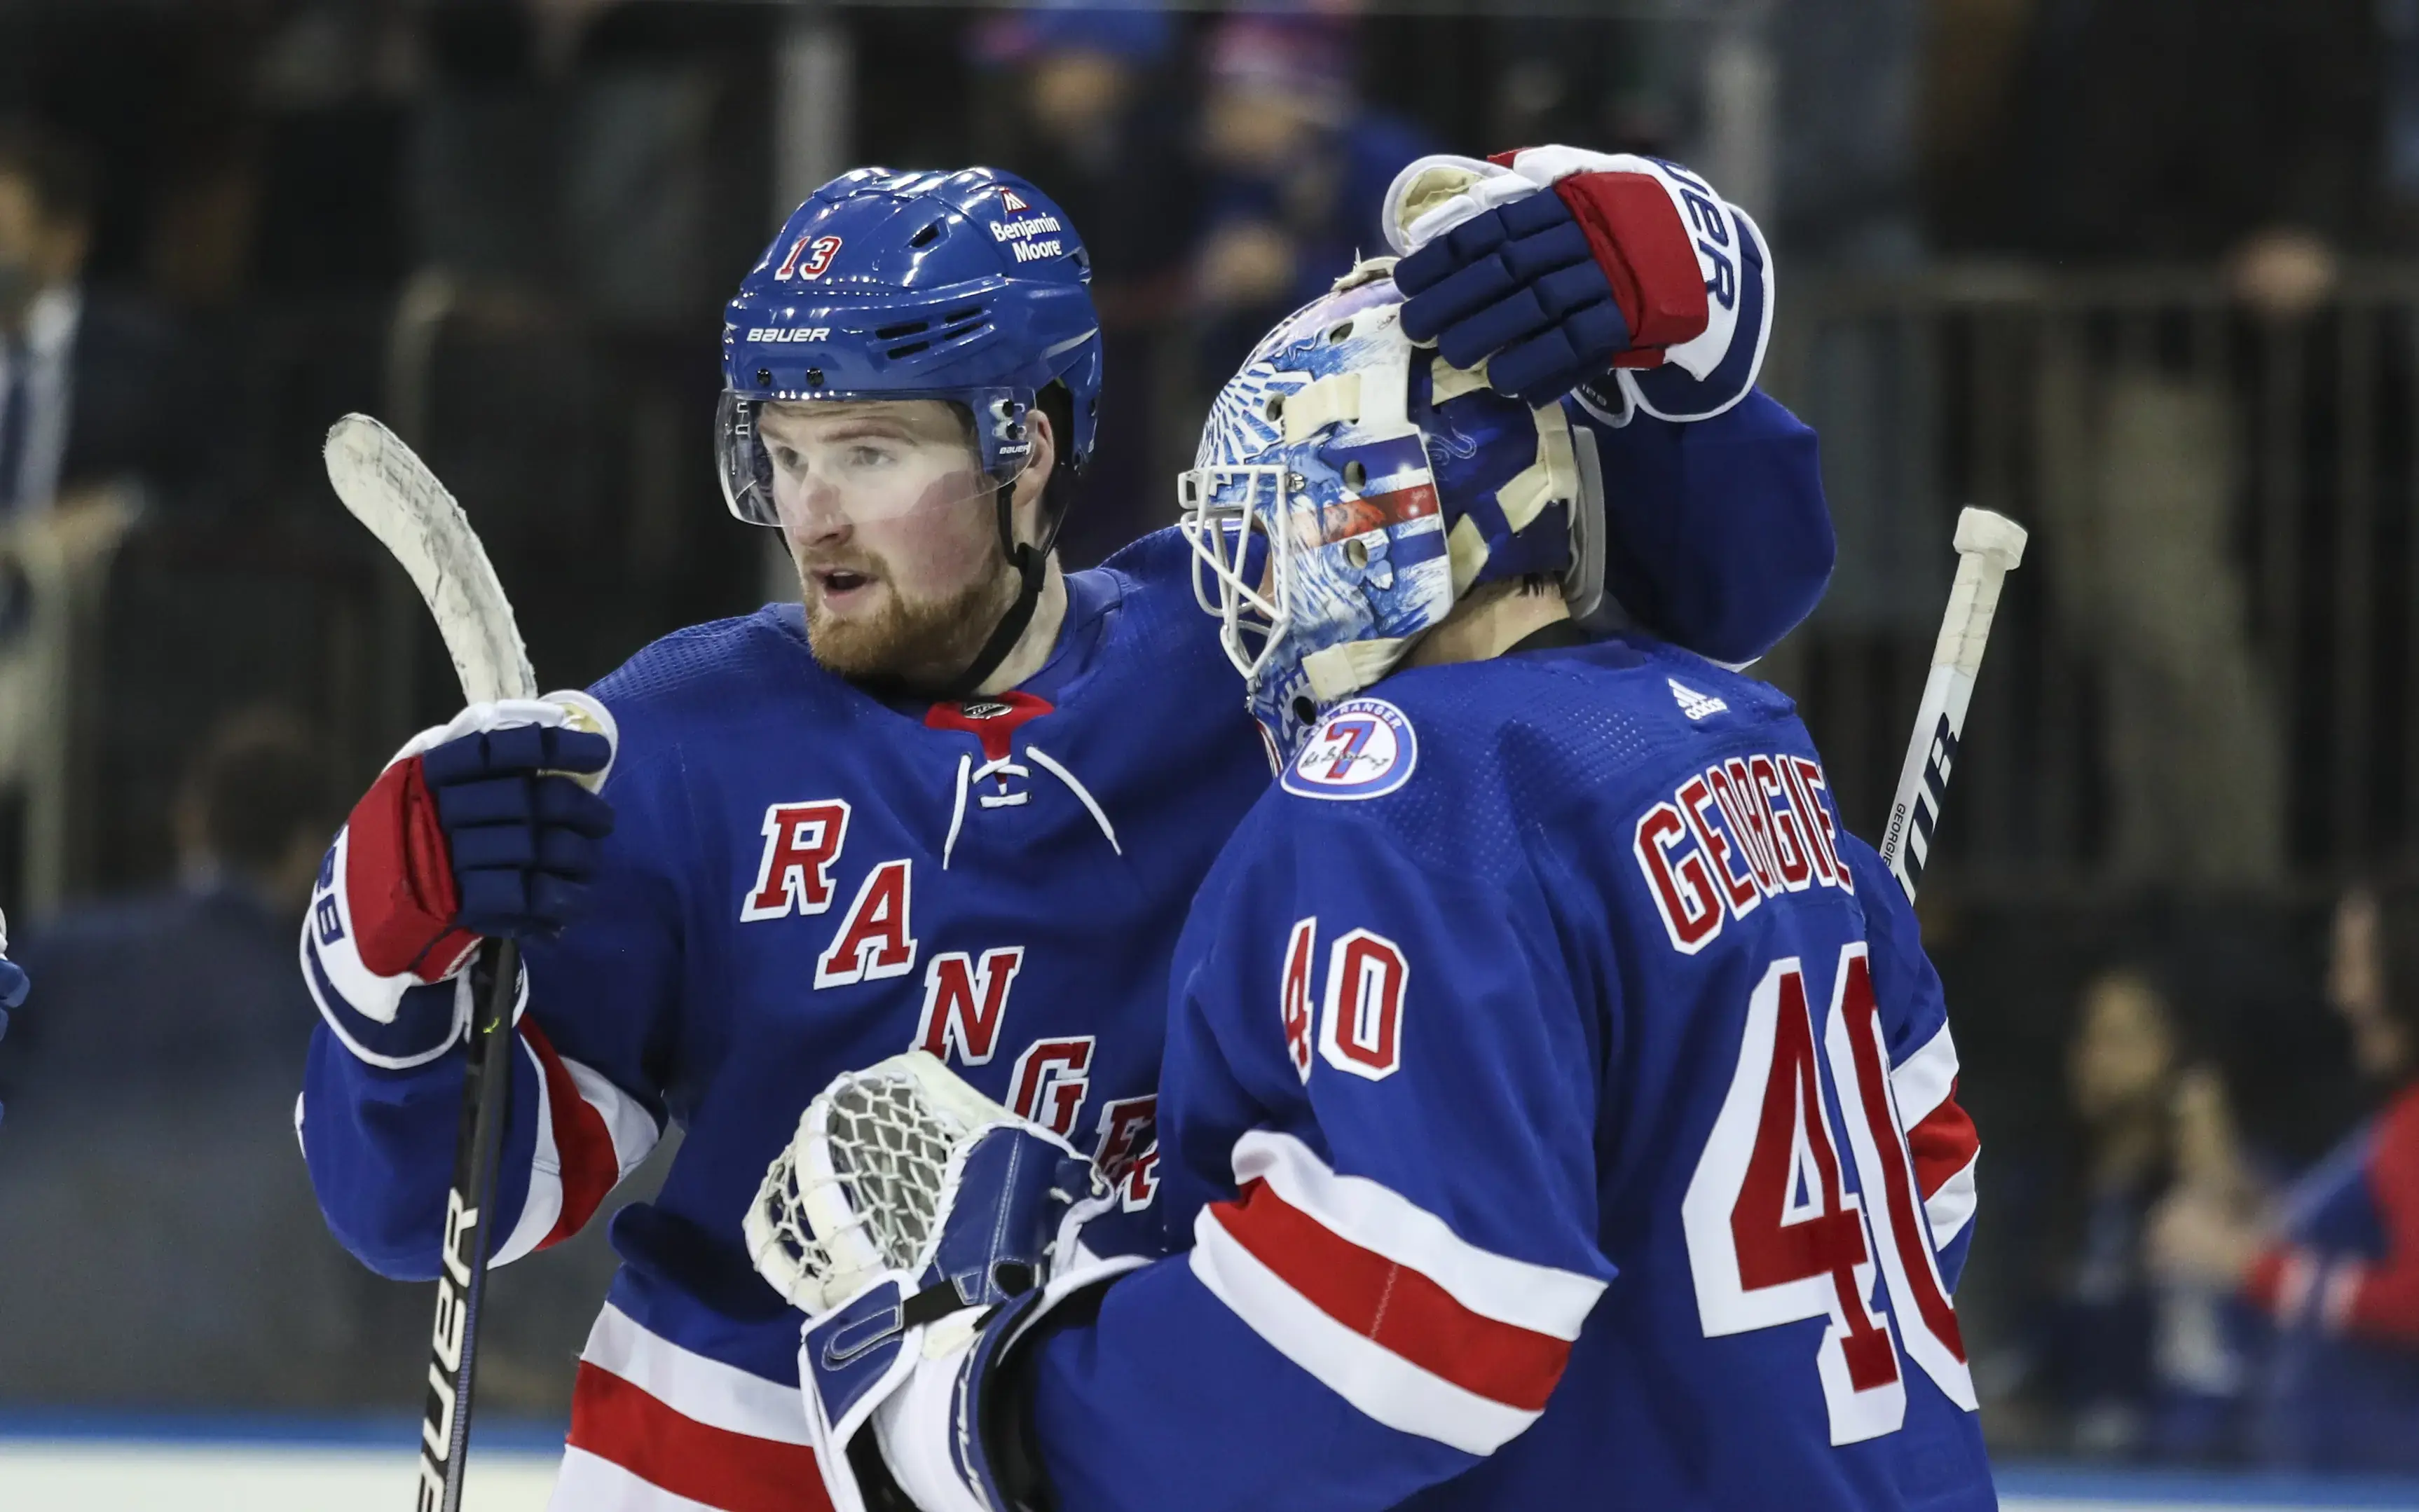 Dec 4, 2021; New York, New York, USA; New York Rangers left wing Alexis Lafreniere (13) celebrates with goalie Alexander Georgiev (40) after defeating the Chicago Blackhawks 3-2 at Madison Square Garden. Mandatory Credit: Wendell Cruz-USA TODAY Sports / © Wendell Cruz-USA TODAY Sports